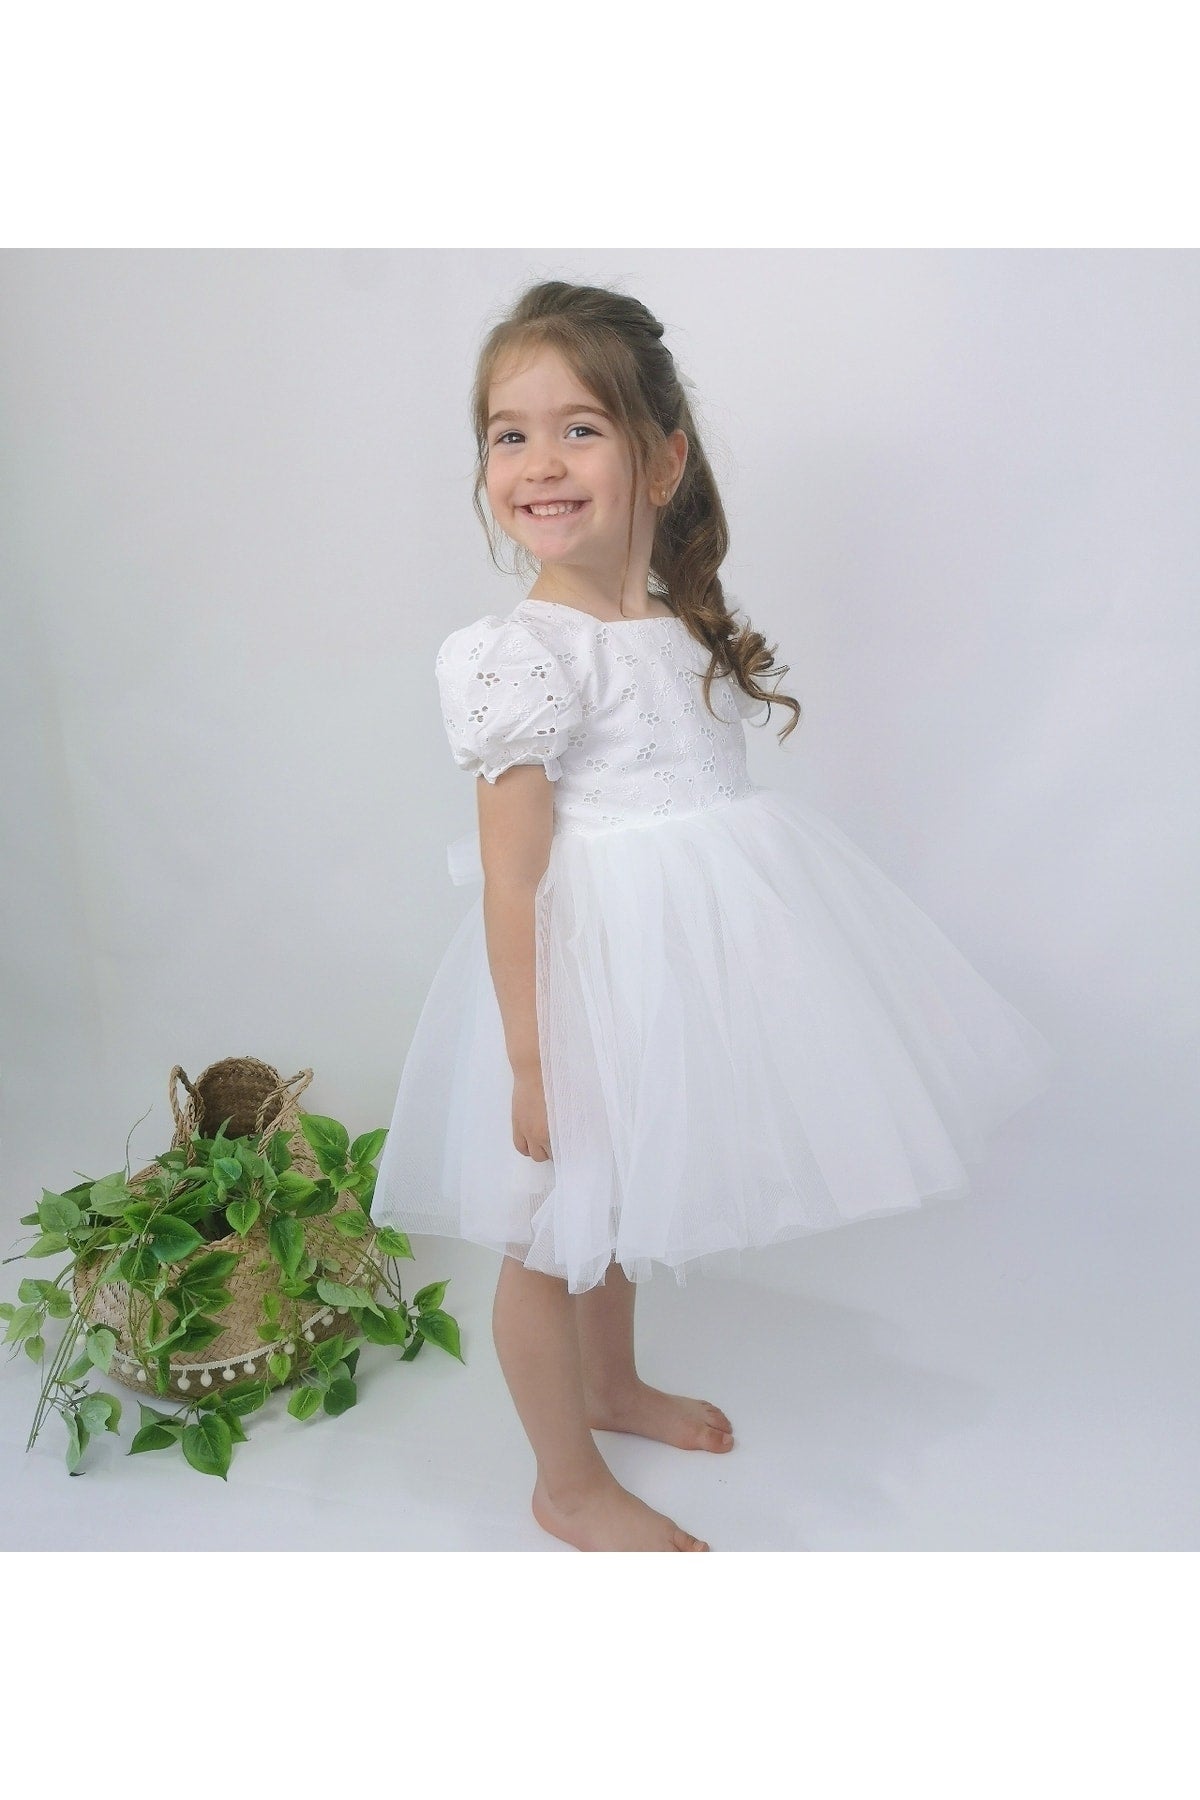 Watermelon Sleeve Embroidered Tutu White Kids Dress (MUST READ PRODUCT DESCRIPTION)